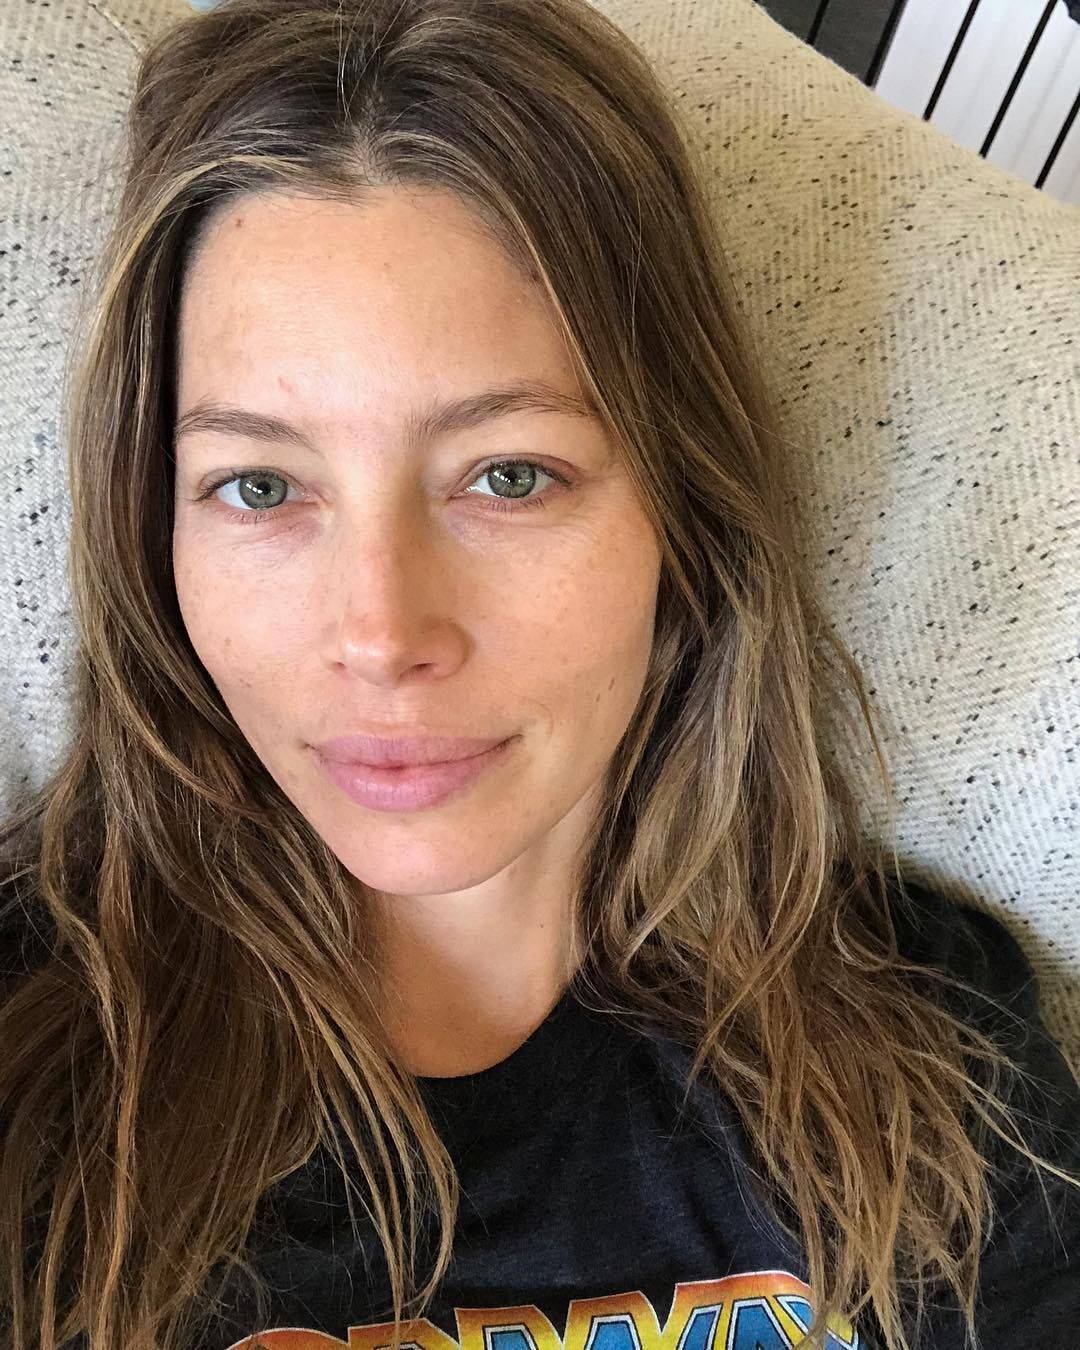 Mommy Jessica Biel Wants Me To Cum Inside Her What Should I Do